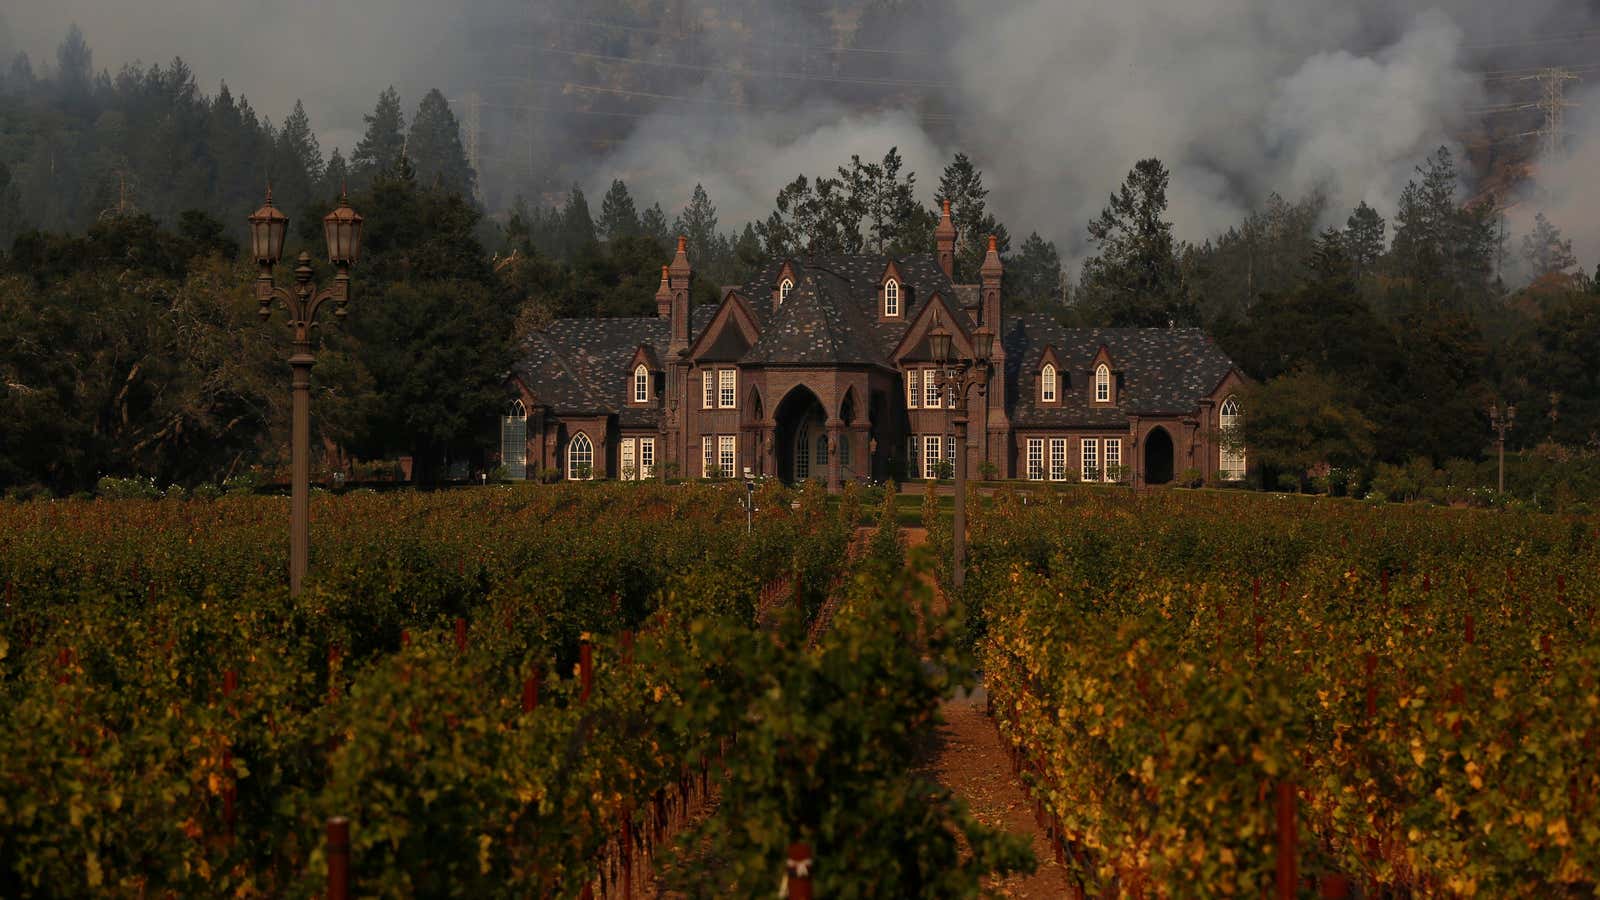 Extreme weather events like the California wildfires, and climate change, will increasingly threaten vineyards.